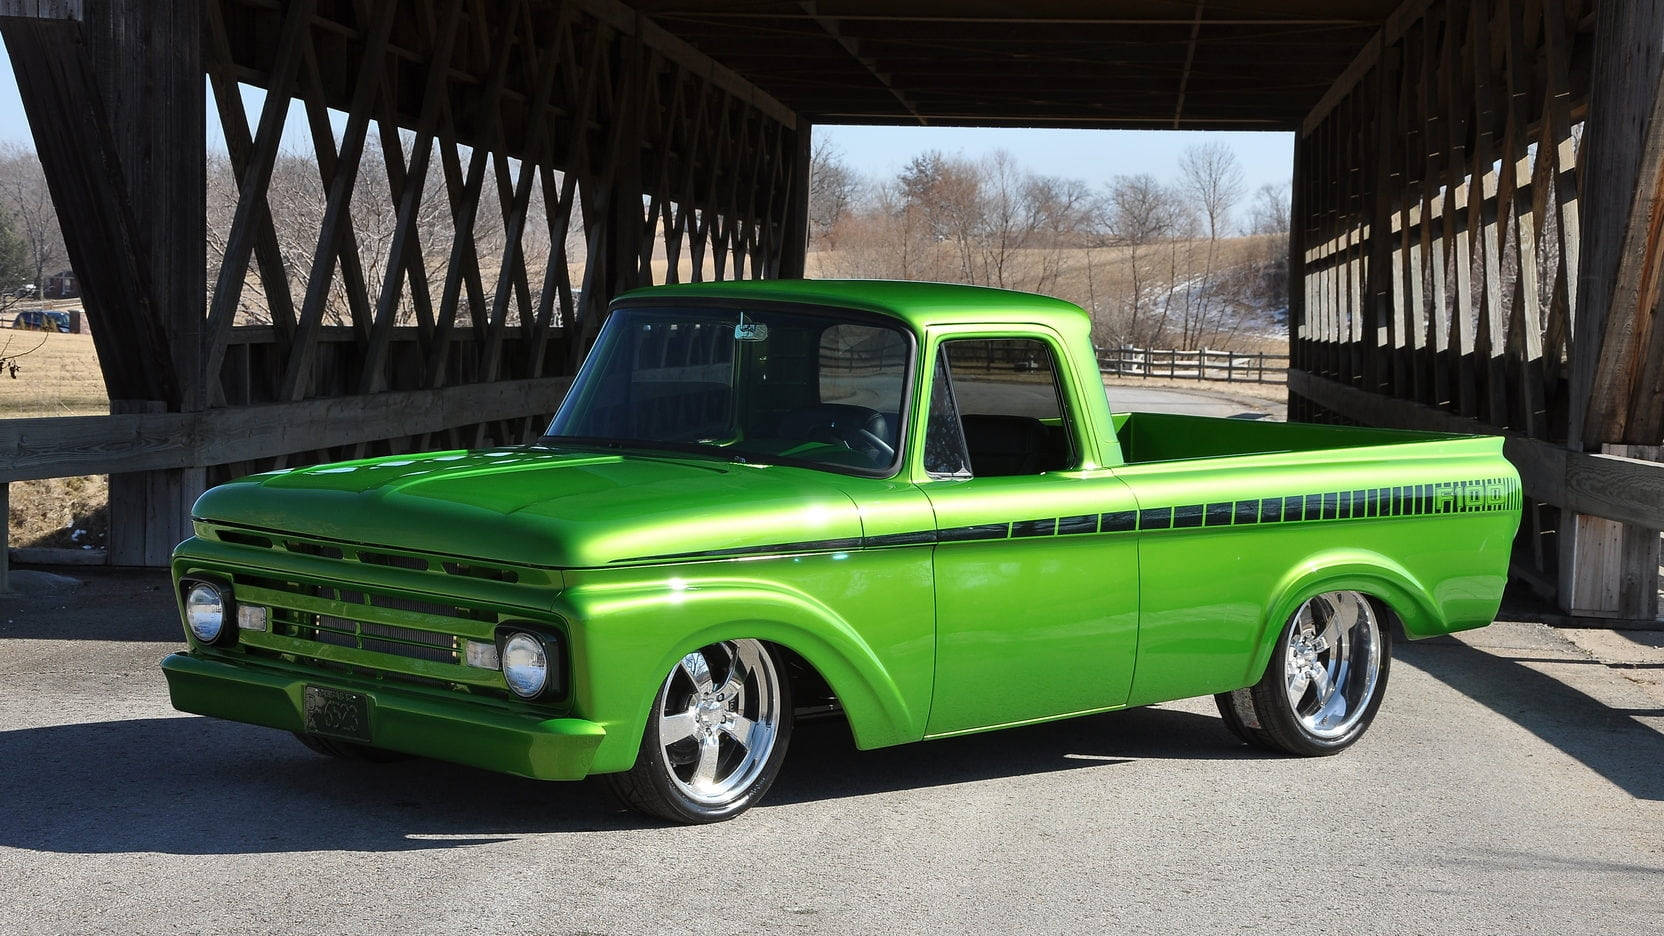 Vintage Charm - Metallic Green Old Ford Truck Wallpaper